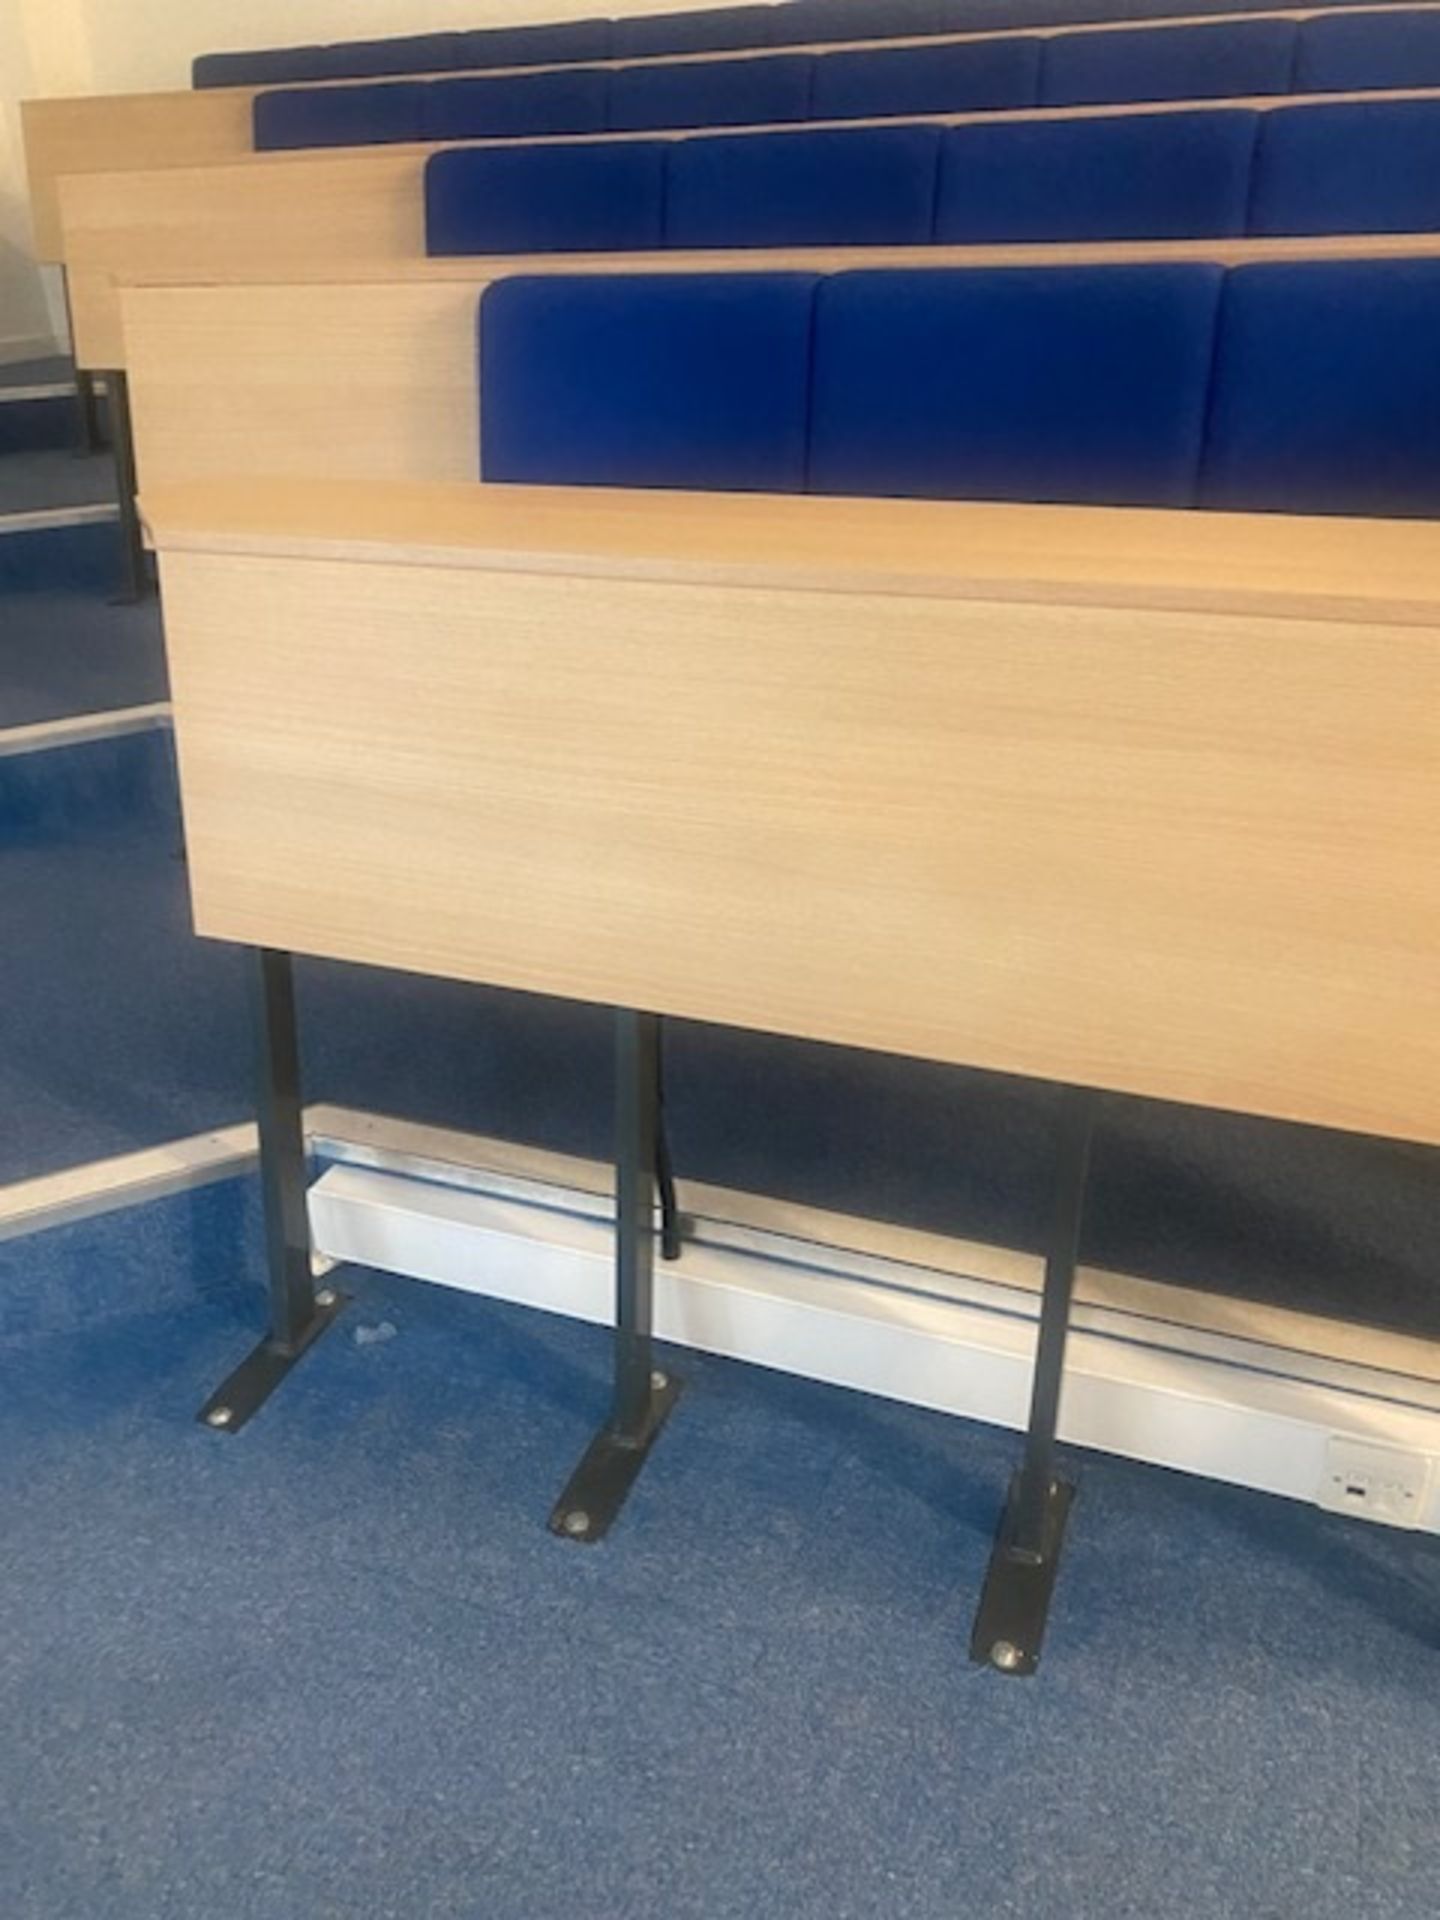 Stage seating With Built In Desks - Image 9 of 10